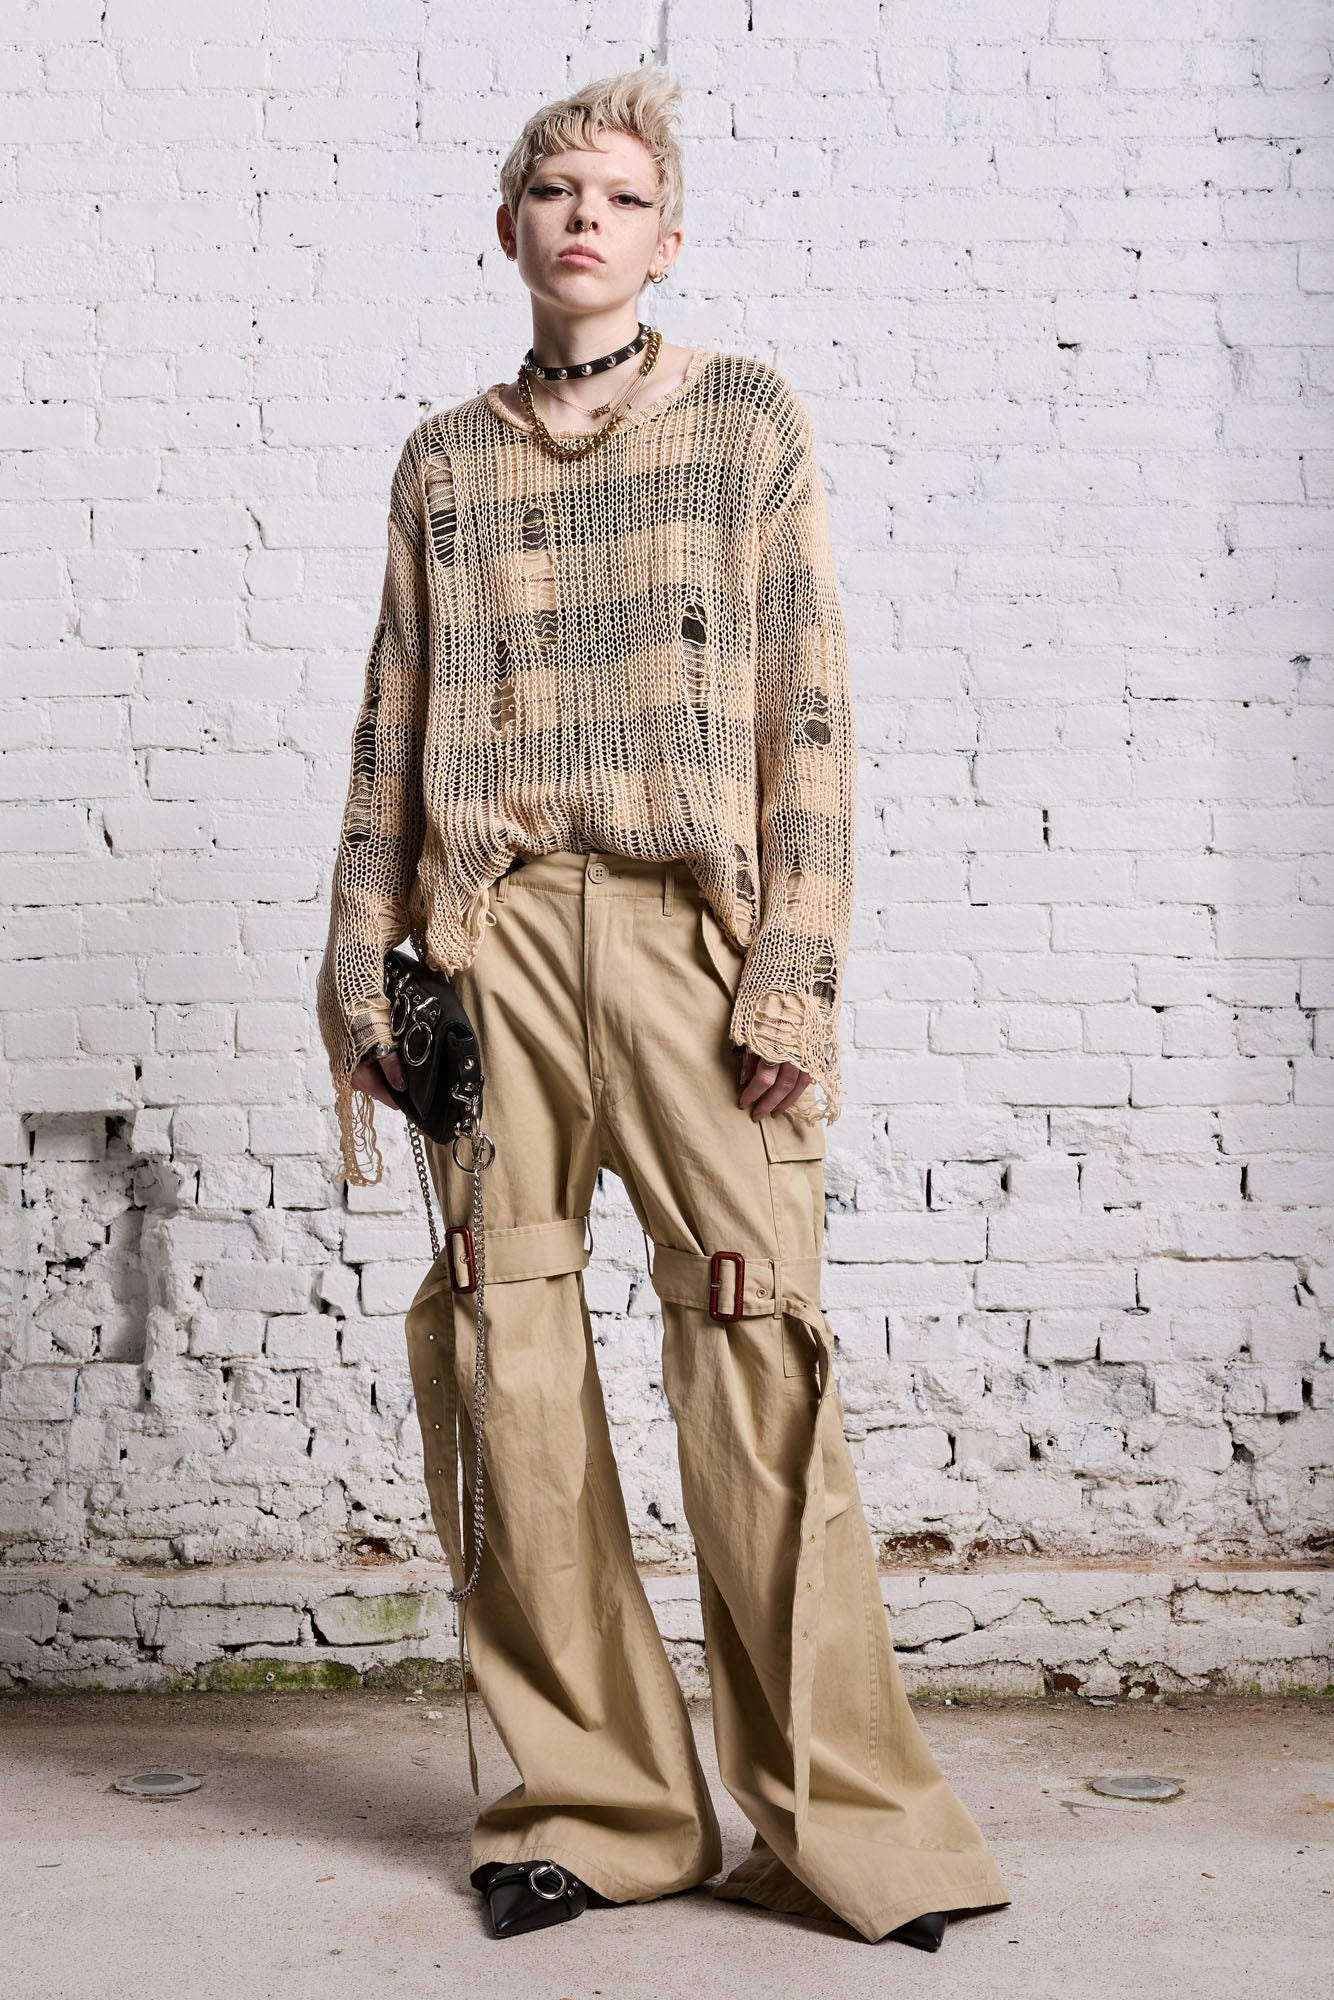 RELAXED OVERLAY CREWNECK - CREAM AND BLACK PLAID